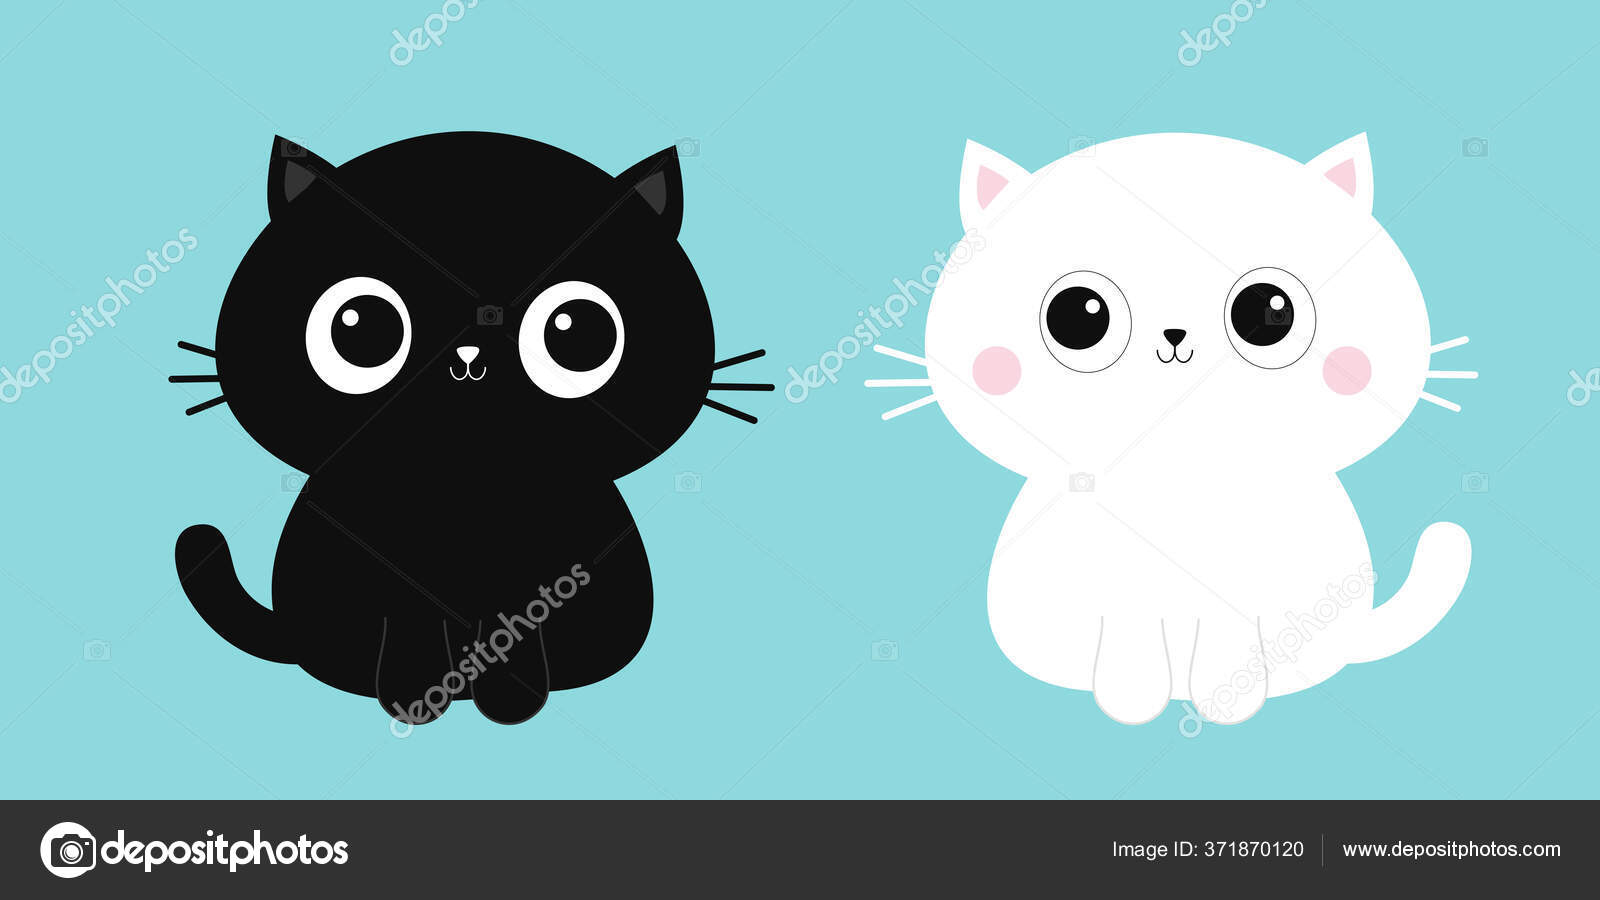 cat icons set, black and white design elements. vector illustration.  25877130 Vector Art at Vecteezy